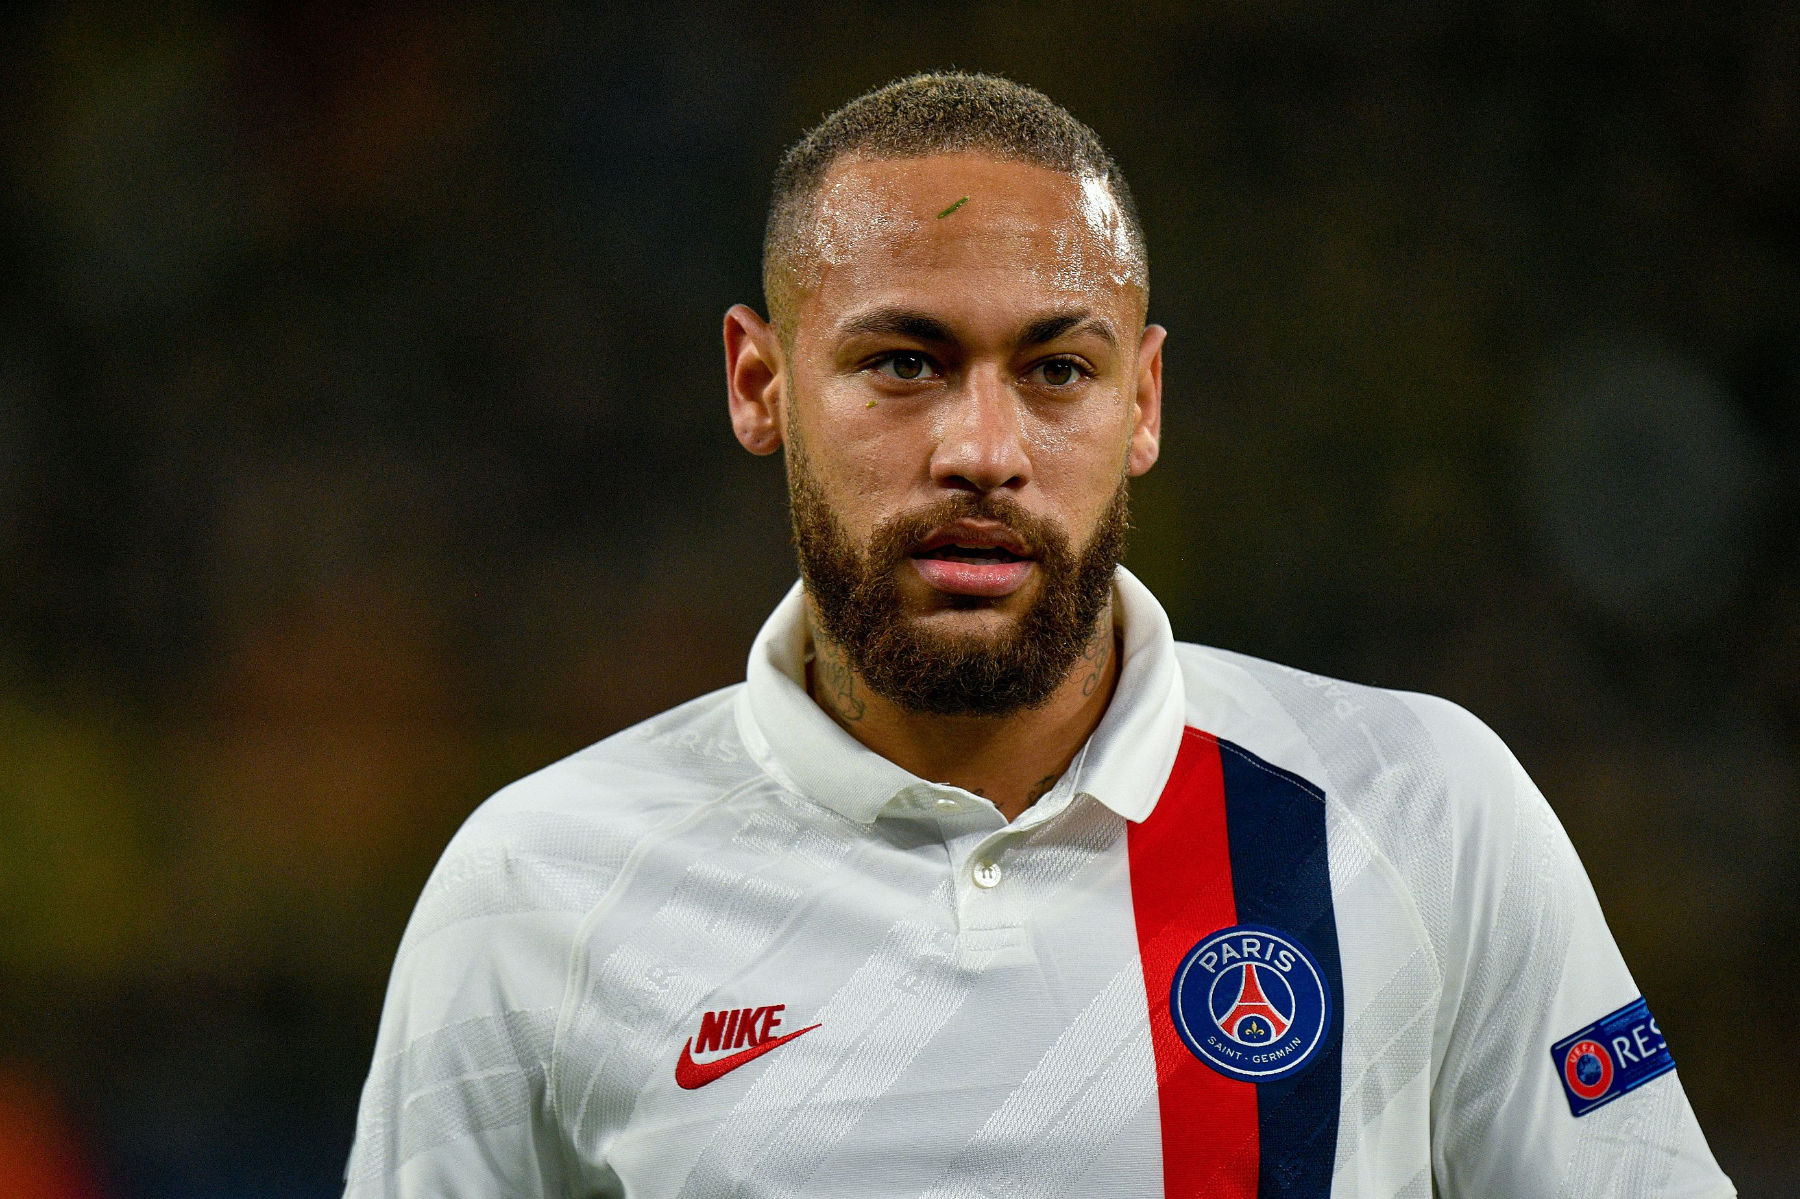 PSG will cash in Neymar and build team around Mbappé  reports  Barca  Blaugranes